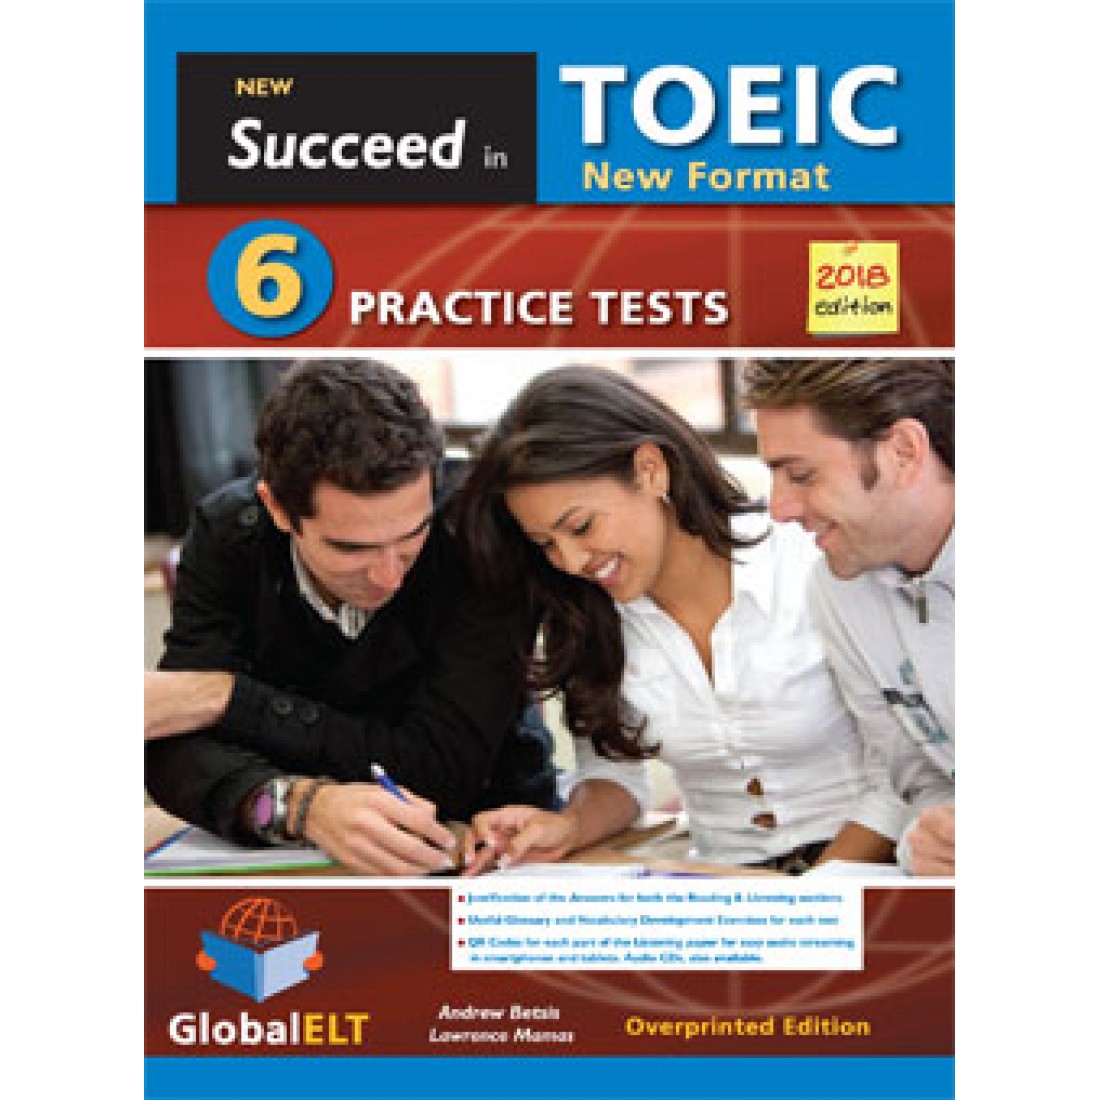 6 Practice Tests for TOEIC Listening and Reading Online Audio